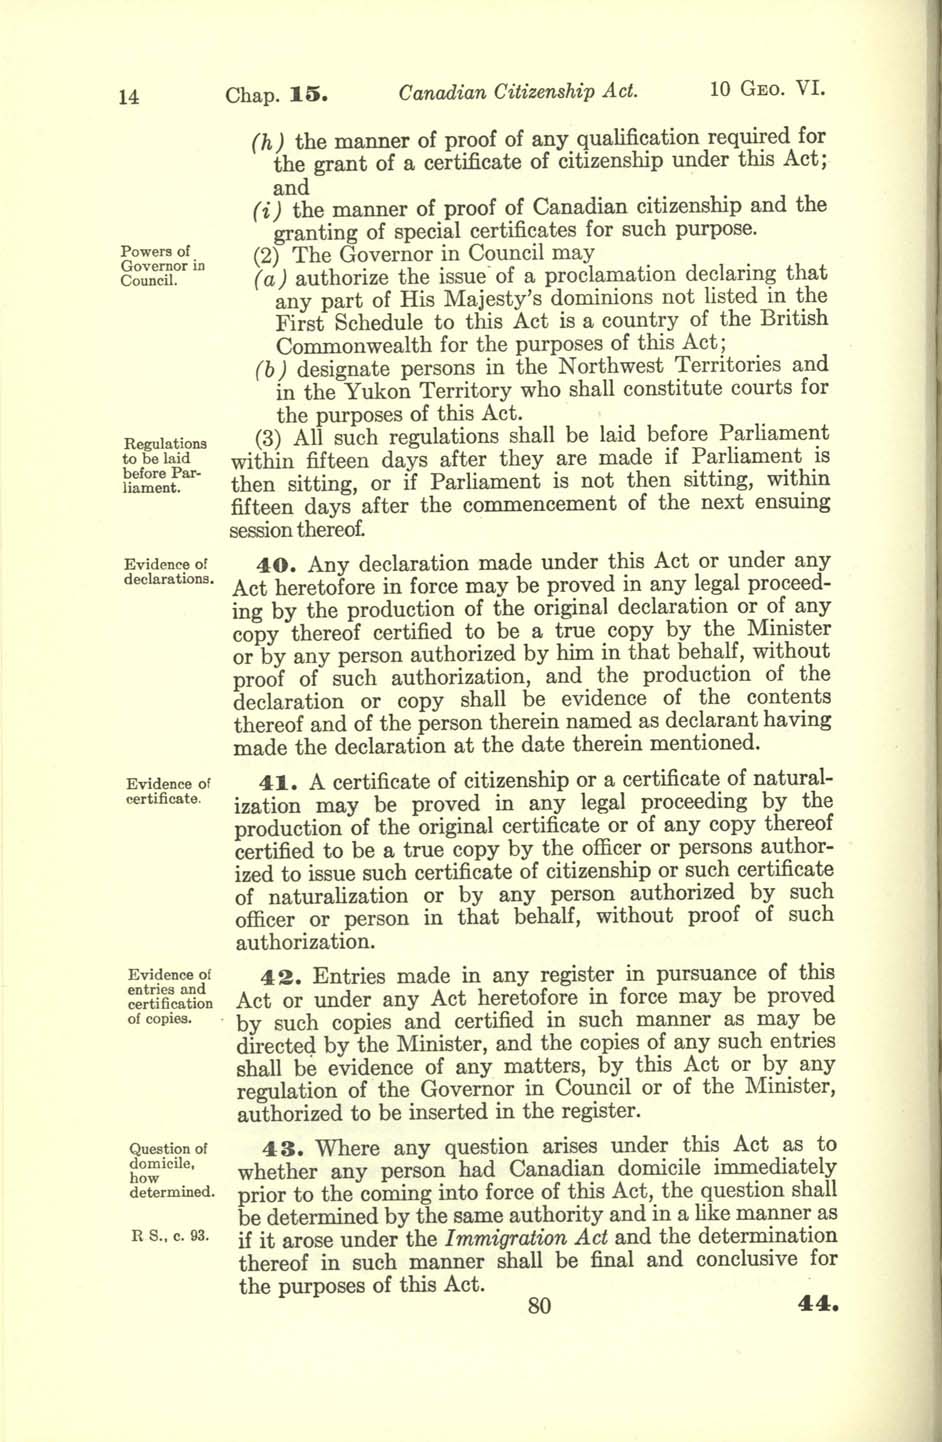 Chap 15 Page 80 Canadian Citizenship Act, 1947